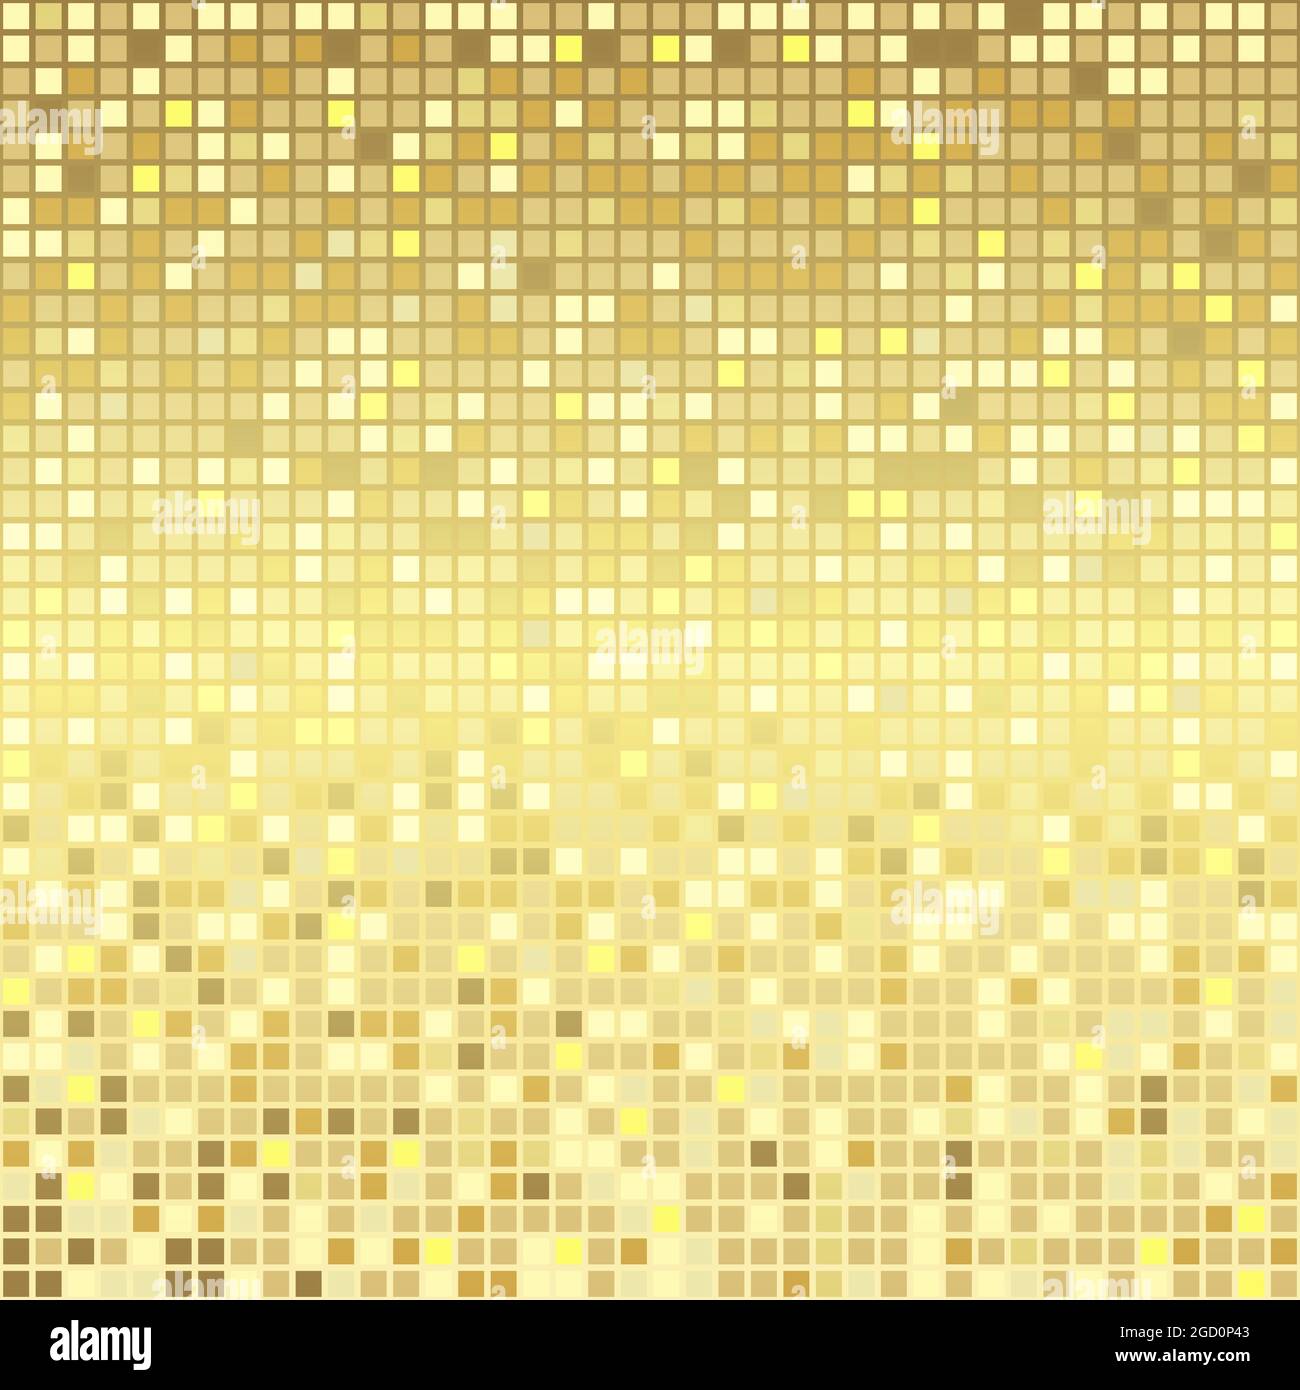 Abstract golden pixel vector background. Gold square texture mosaic modern pattern digital technology. Luxury design for Happy New Year, Christmas Stock Vector